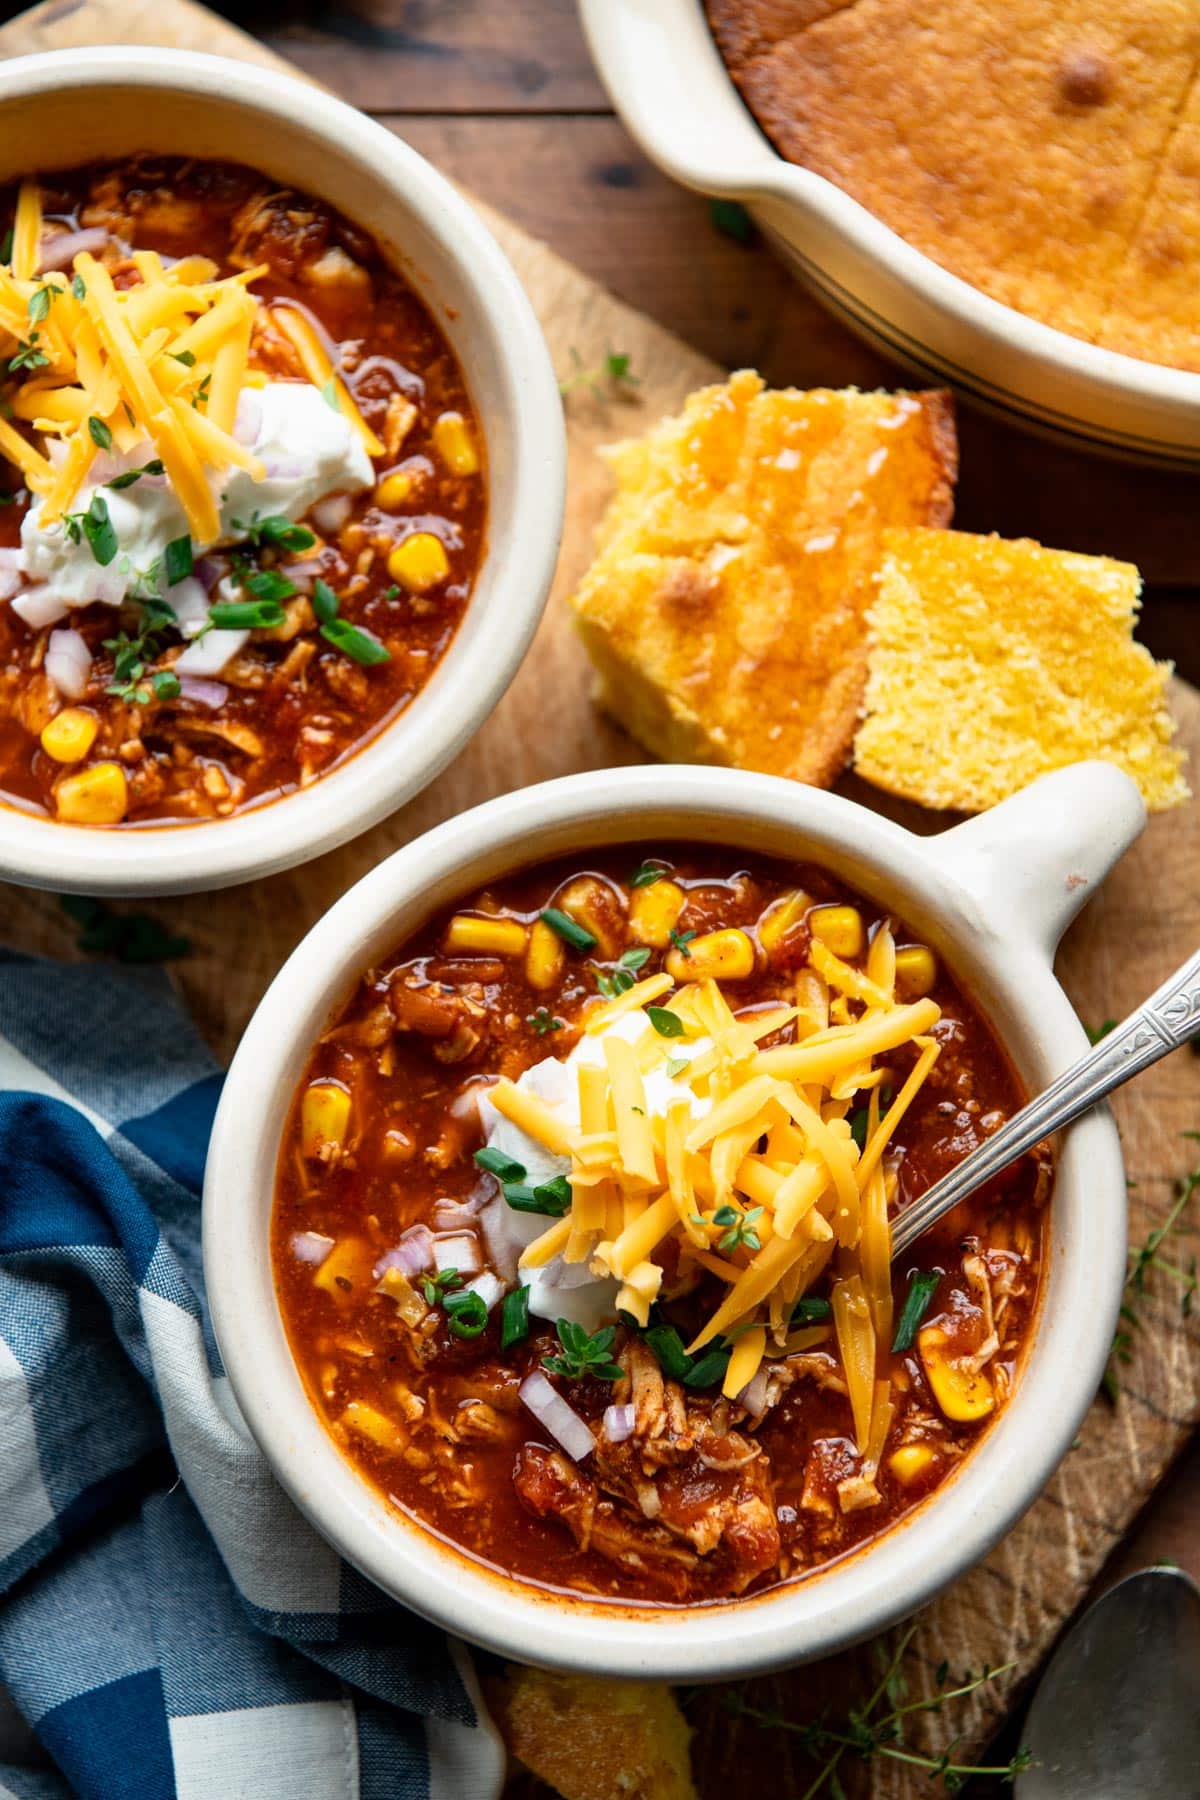 Overhead image of two bowls of leftover turkey chili on a wooden table with a side of cornbread.